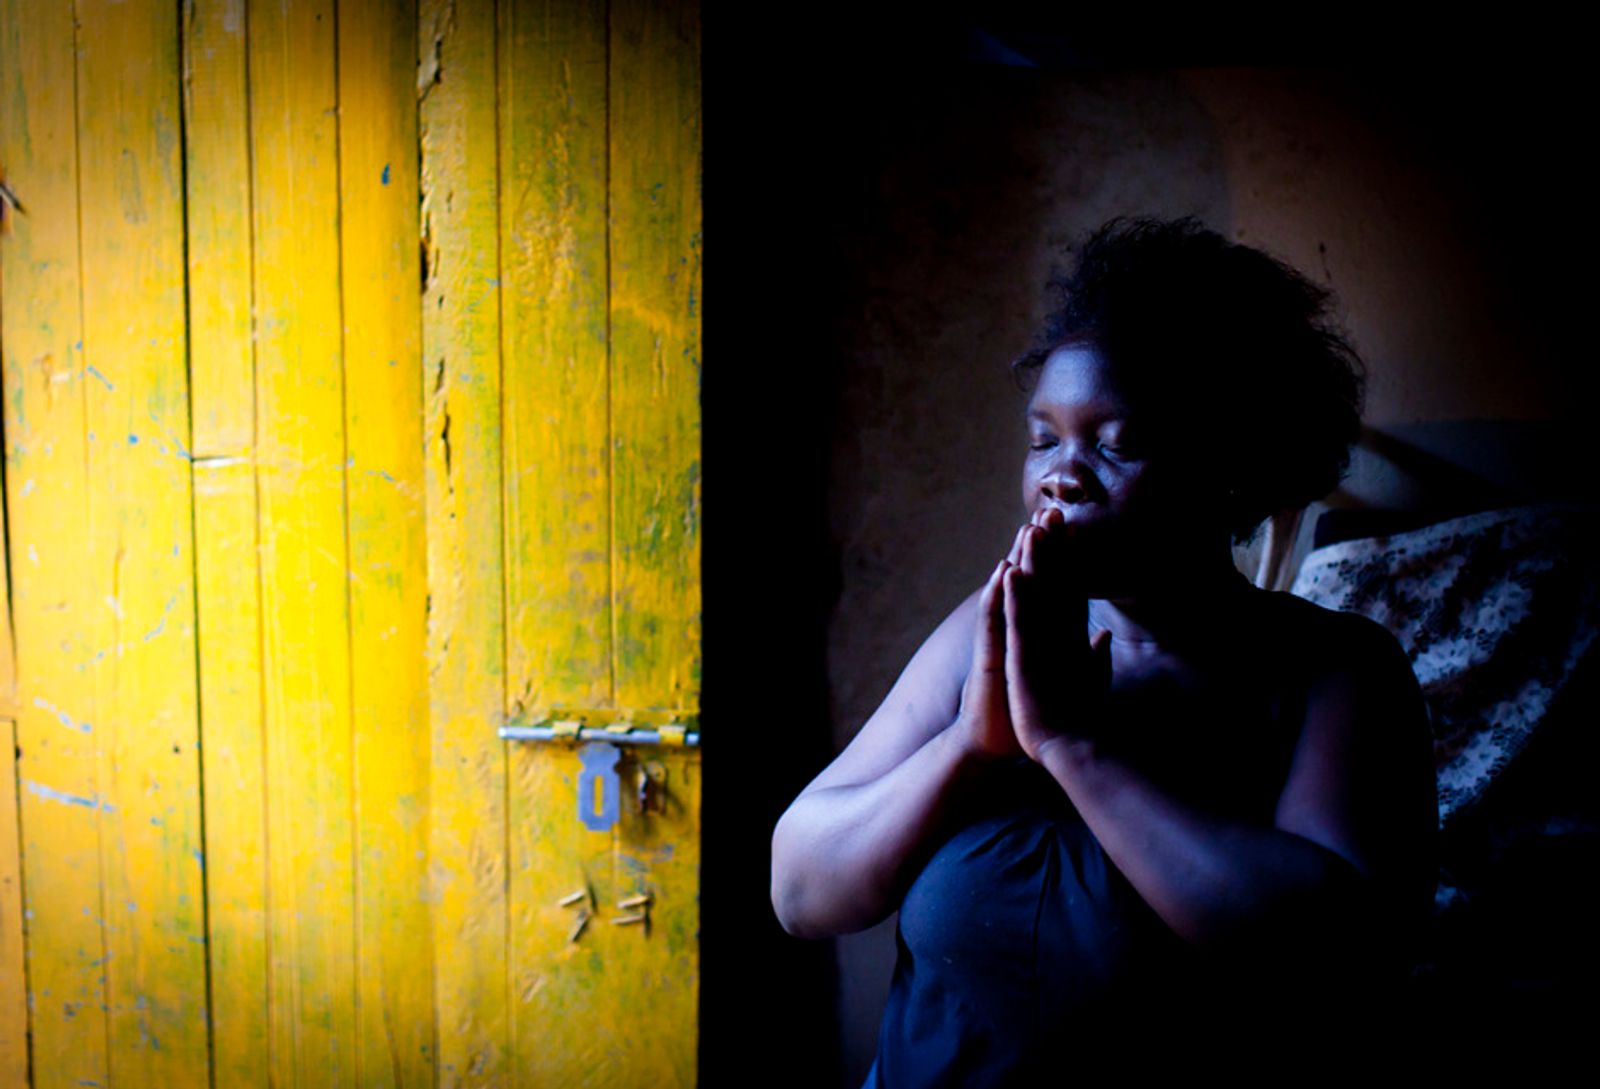 © Anne Ackermann - Irene, 29, prays a lot. She lost one of her legs when she stepped on a landmine 12 years ago.